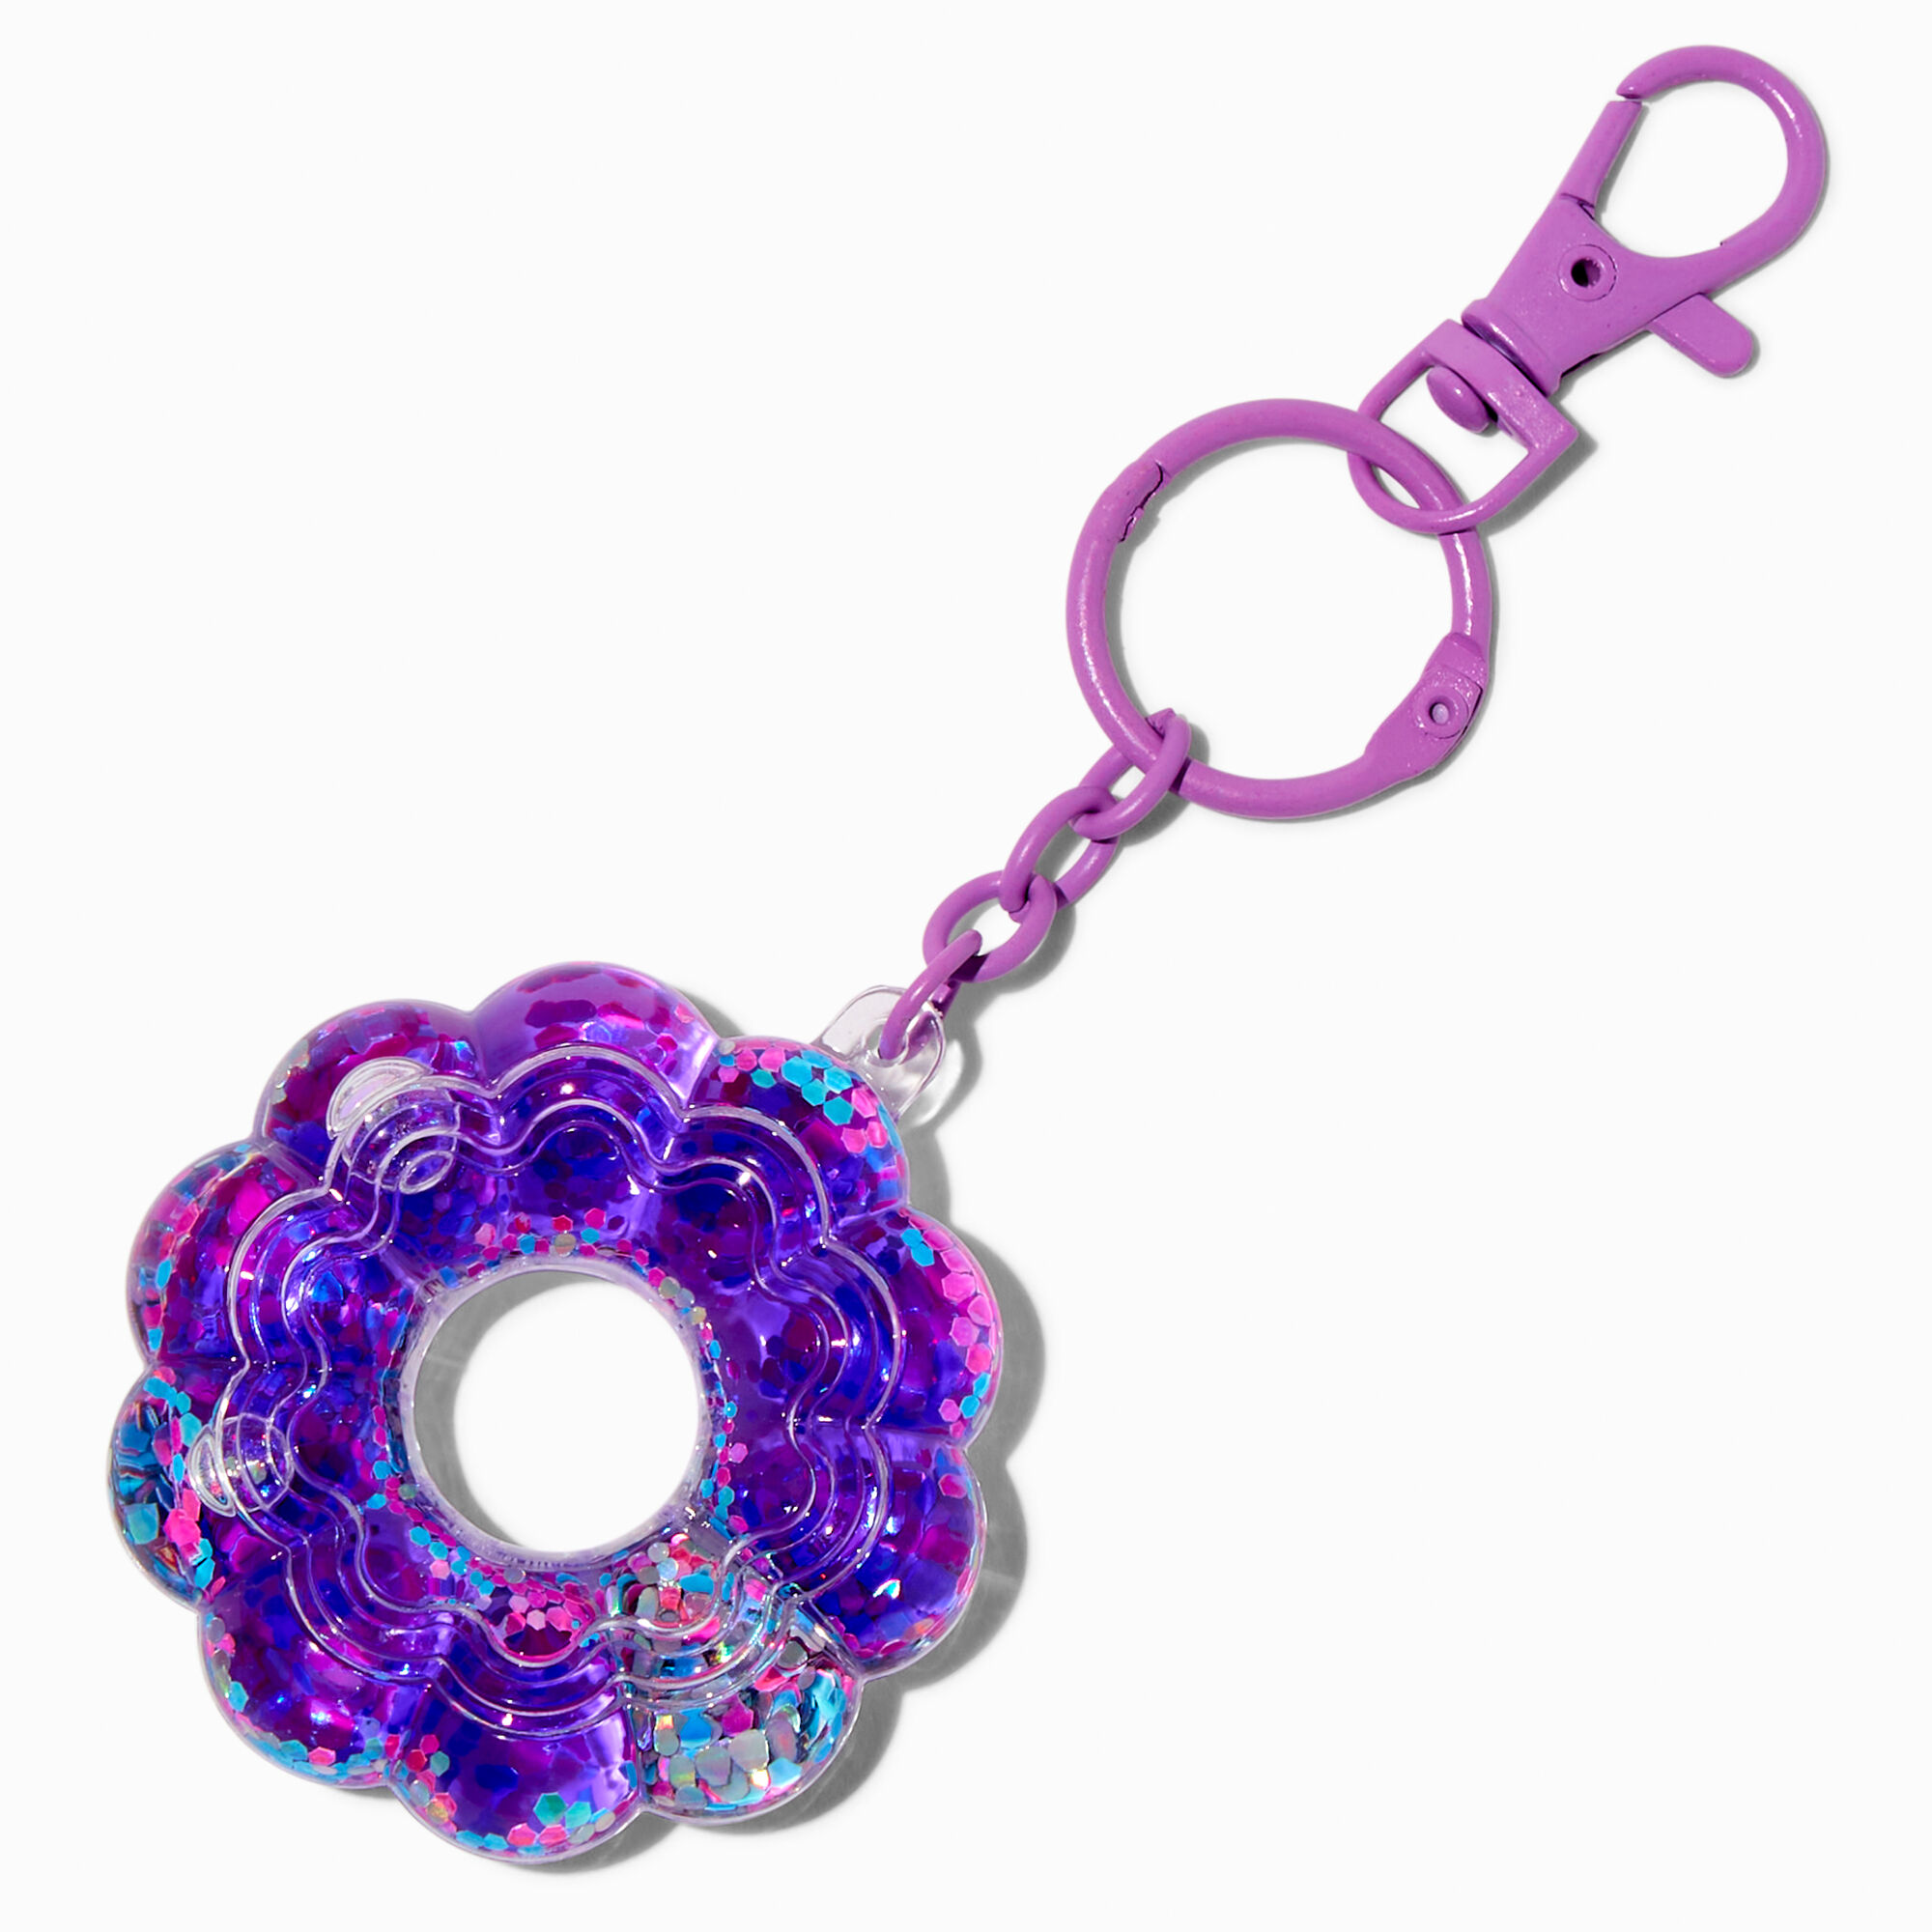 View Claires Mochi Donut WaterFilled Keyring information